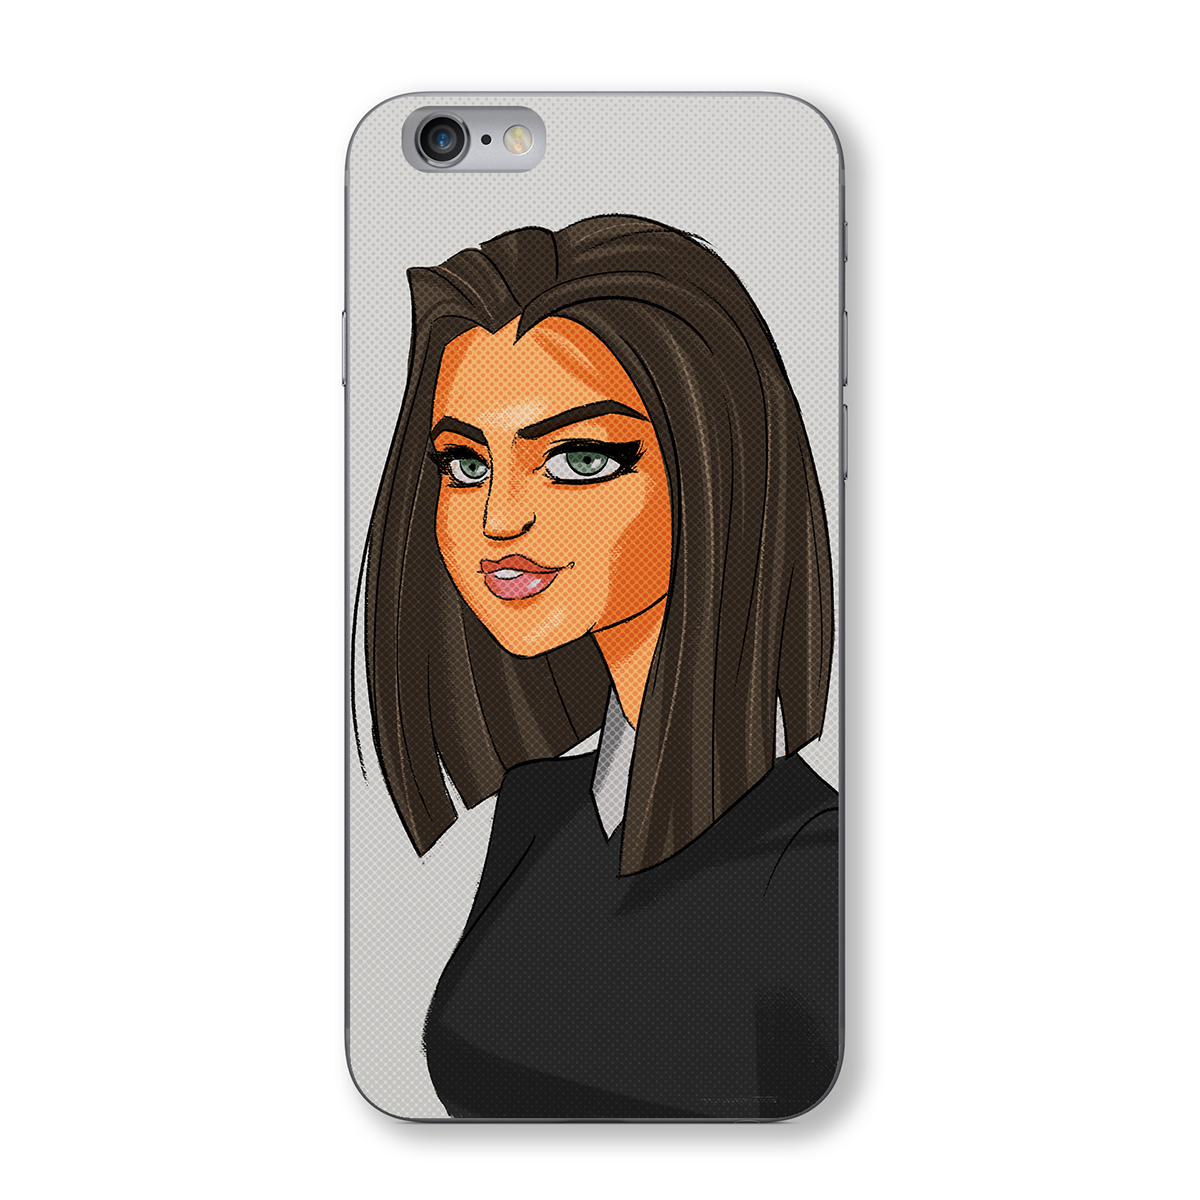 phone phonecase Character design  Personalized product Porträt ILLUSTRATION  Digital Art  Fashion  surface design